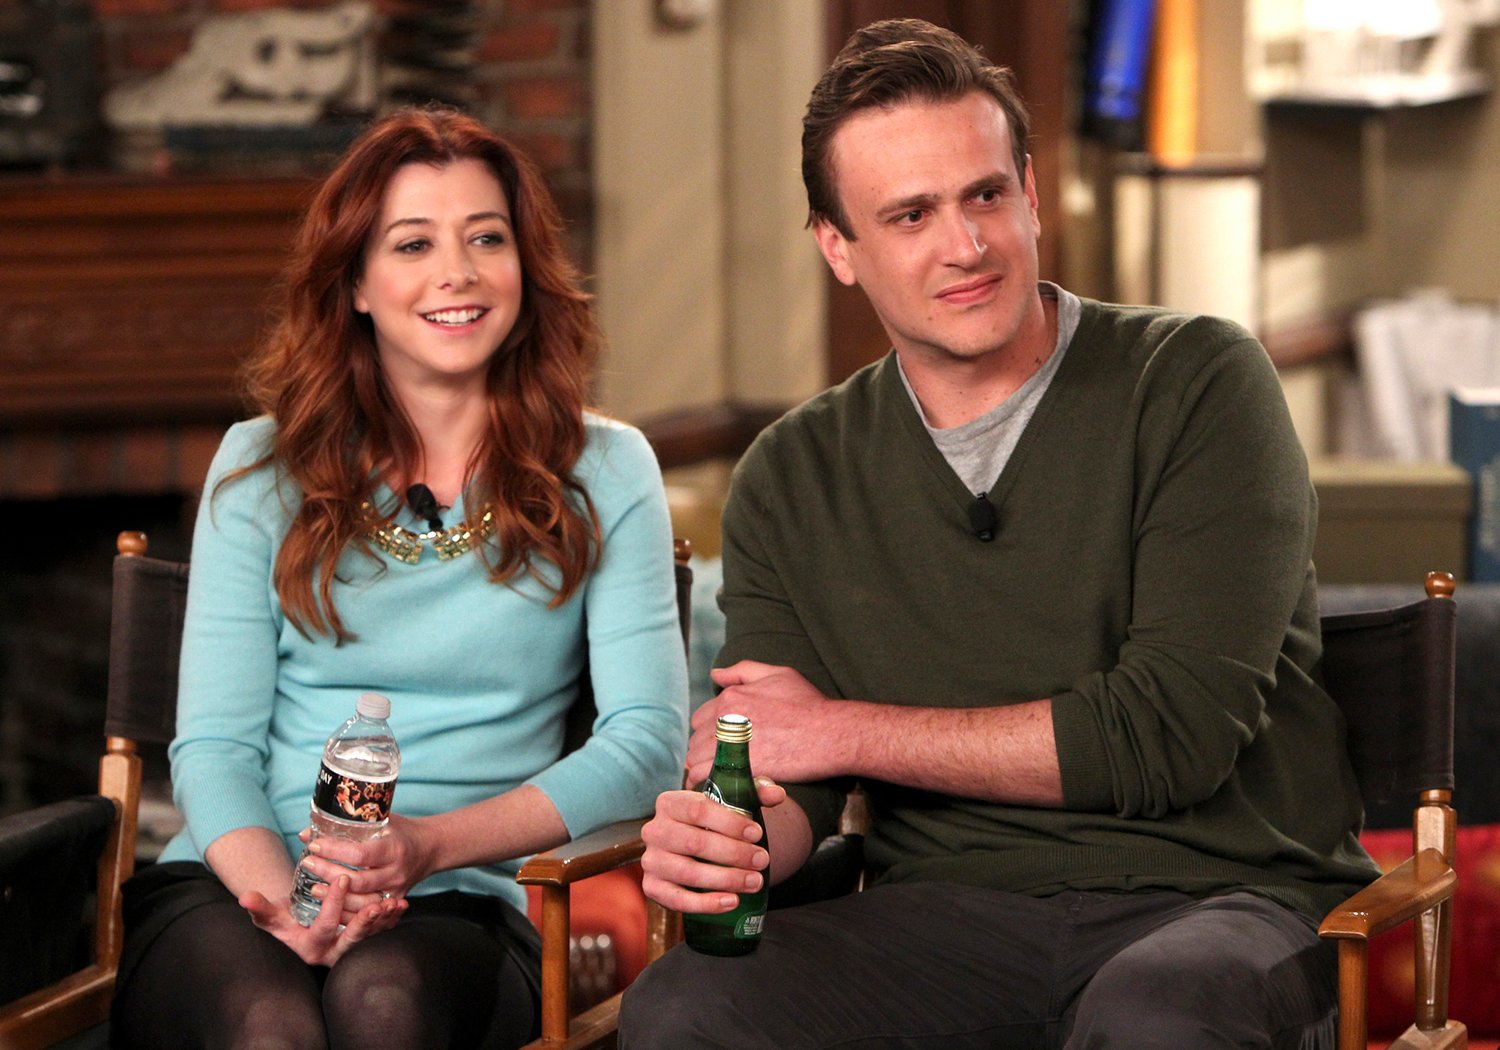 Alyson Hannigan, who played Lily Aldrin, and Jason Segel, who played Marshall Eriksen, at the How I Met Your Mother TCA Winter Press Tour in 2014